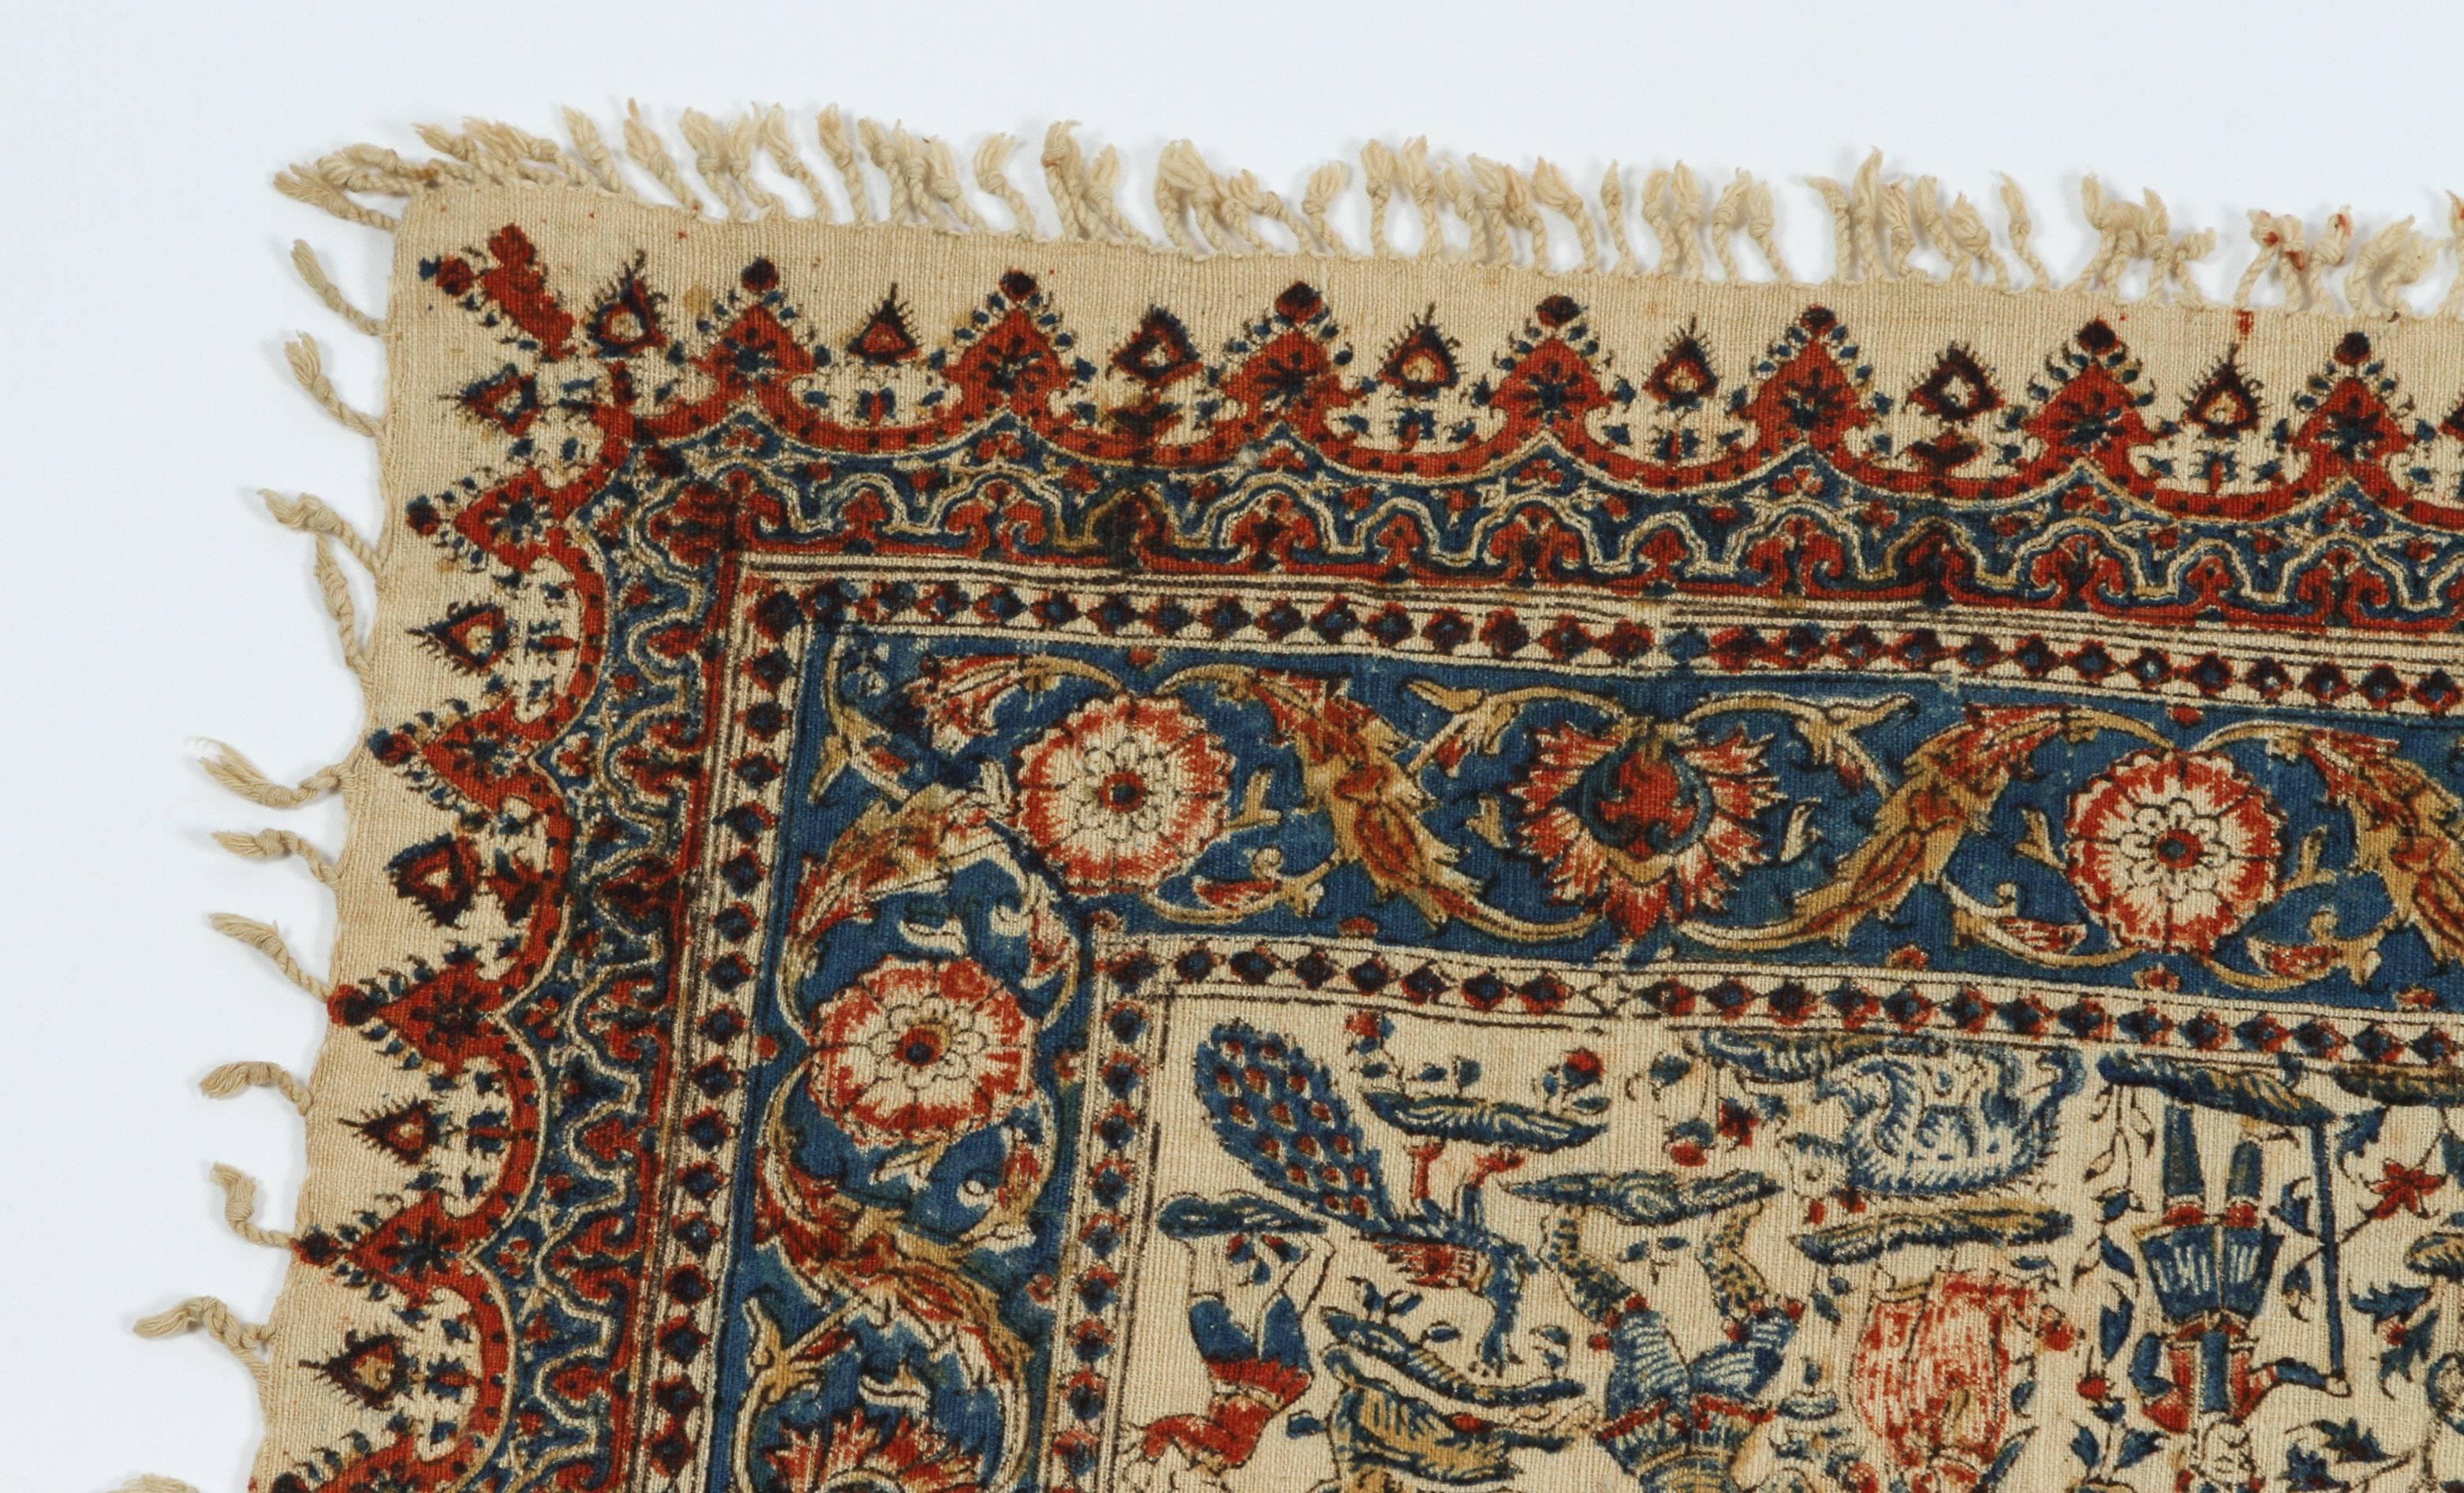 Paisley Kalamkari textile.
Hand blocked vegetable and iron oxide dyes on cotton.
The fabric is printed using patterned wooden stamps .
Made in India for the Persian market, circa 1940
Qalamkari literally “pen-workmanship,” are block-printed and